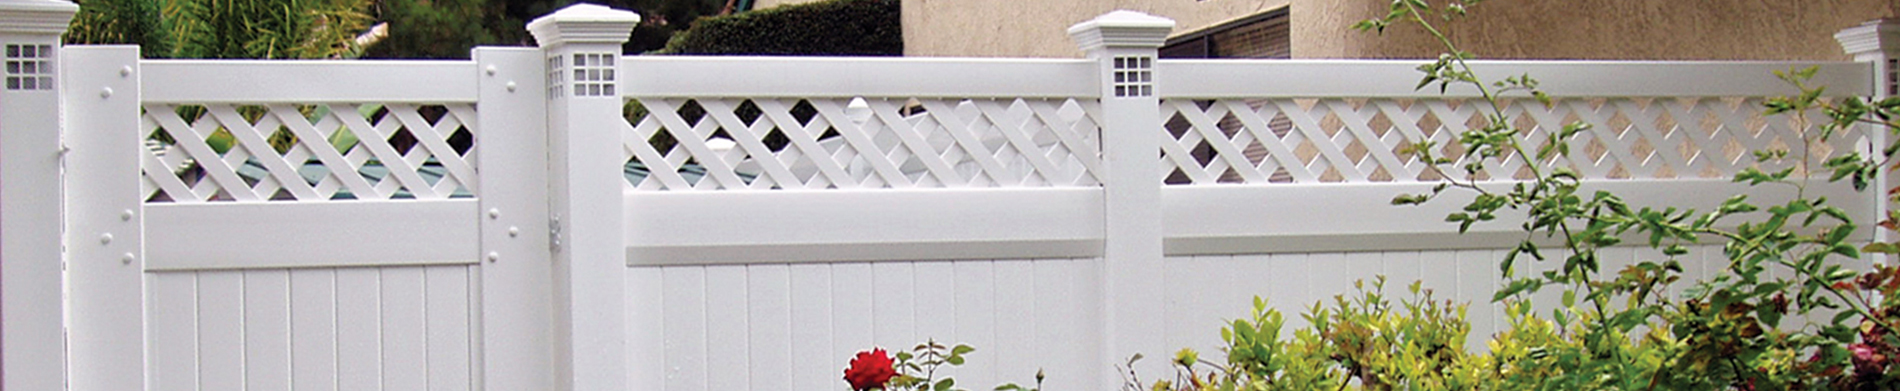 Install a vinyl privacy fence from Duramax – Our fences offer traditional fences